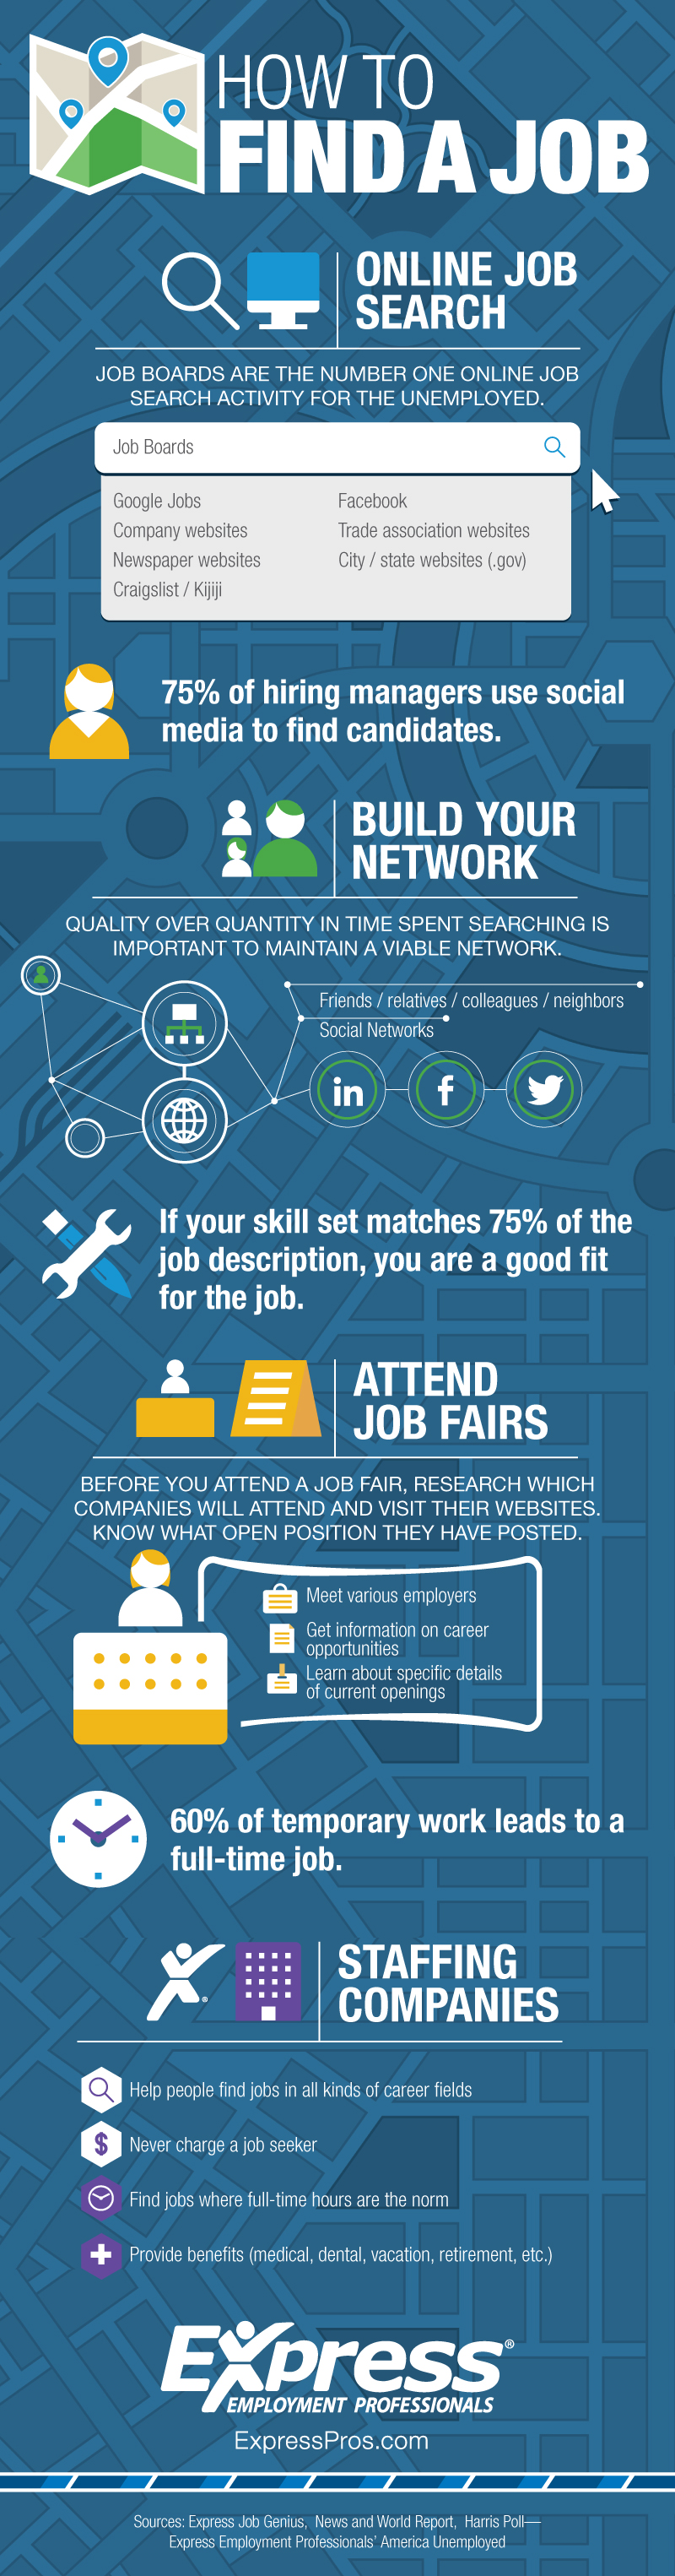 Infographic - How to Find a Job - Fishers, Indianapolis, IN